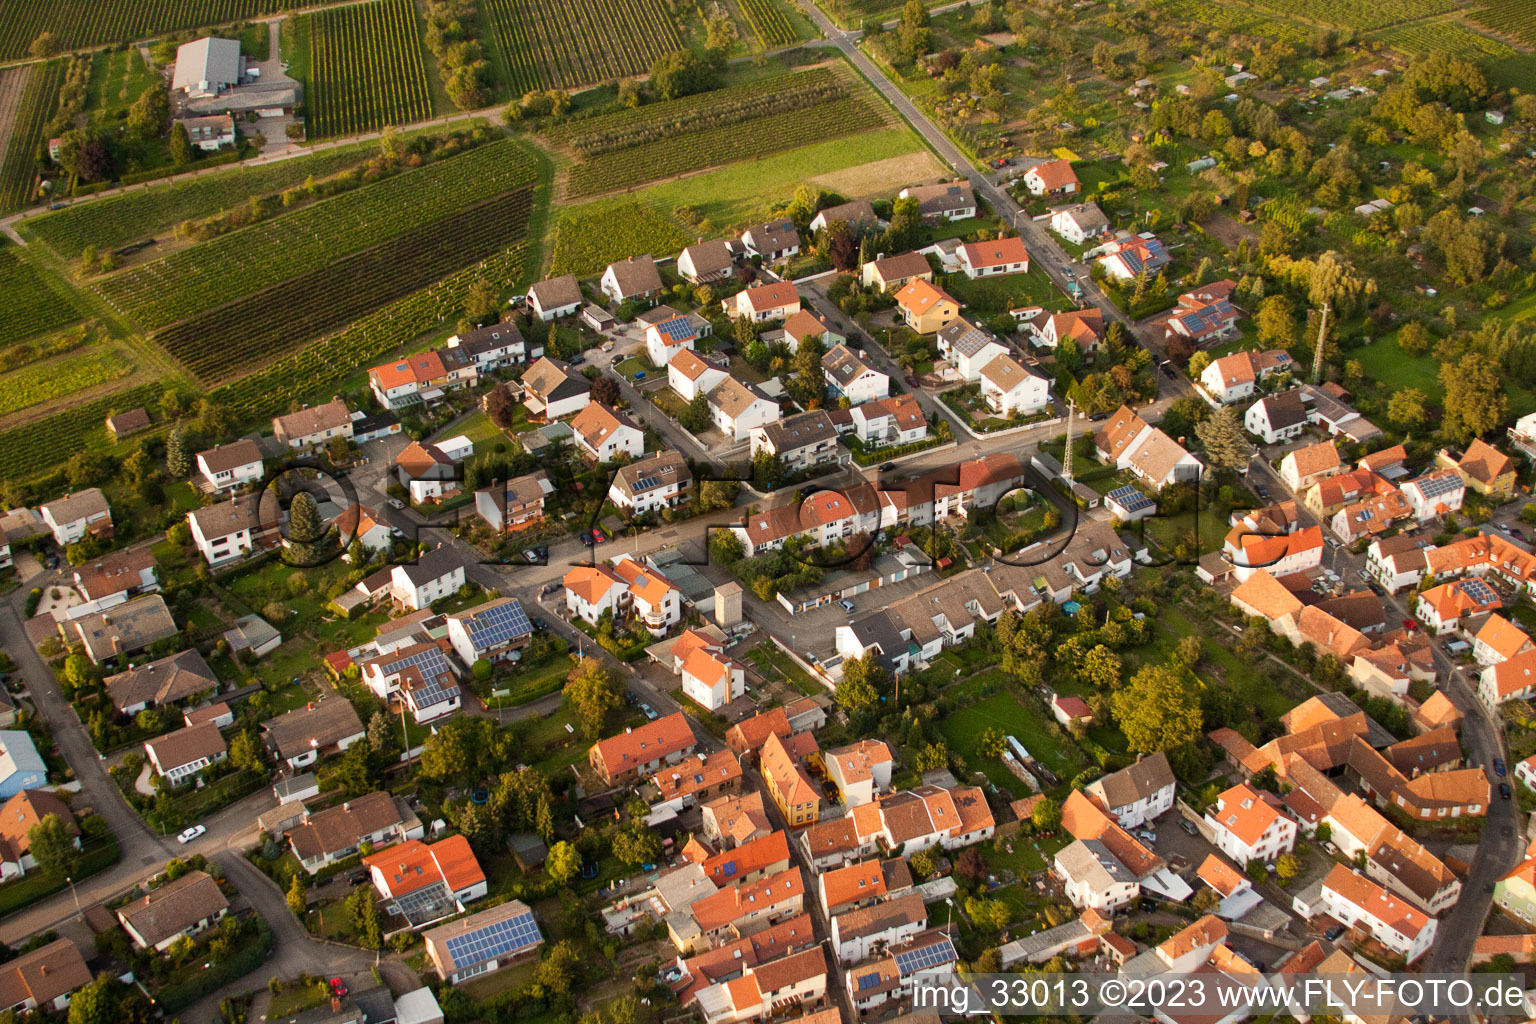 Aerial photograpy of Grape variety district in the district Godramstein in Landau in der Pfalz in the state Rhineland-Palatinate, Germany